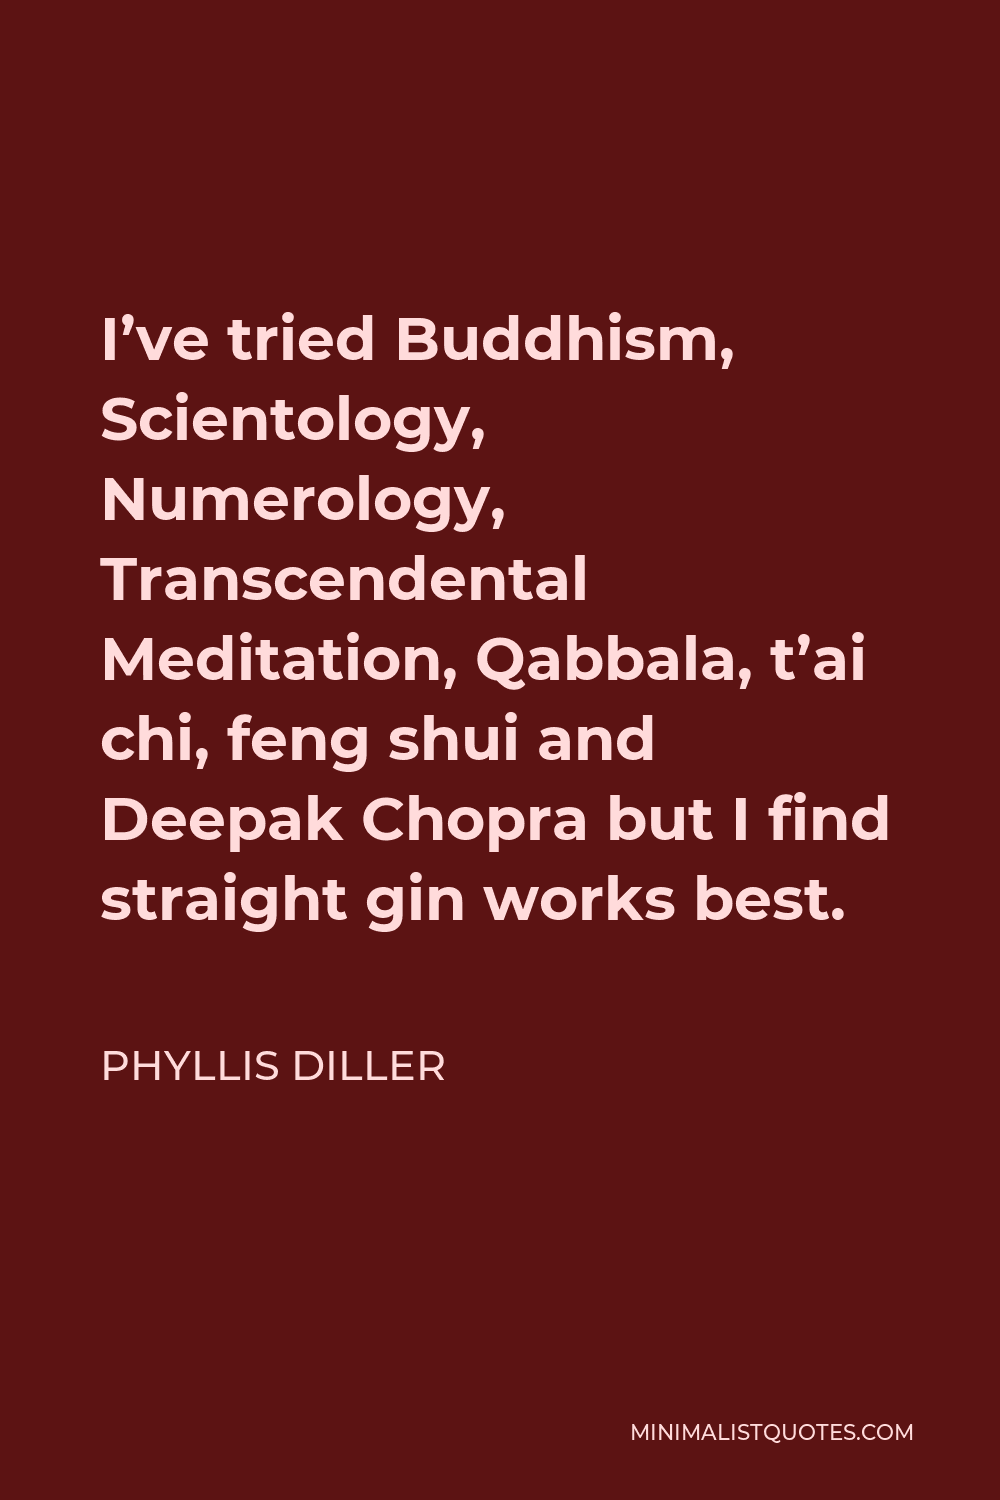 Phyllis Diller Quote - I’ve tried Buddhism, Scientology, Numerology, Transcendental Meditation, Qabbala, t’ai chi, feng shui and Deepak Chopra but I find straight gin works best.